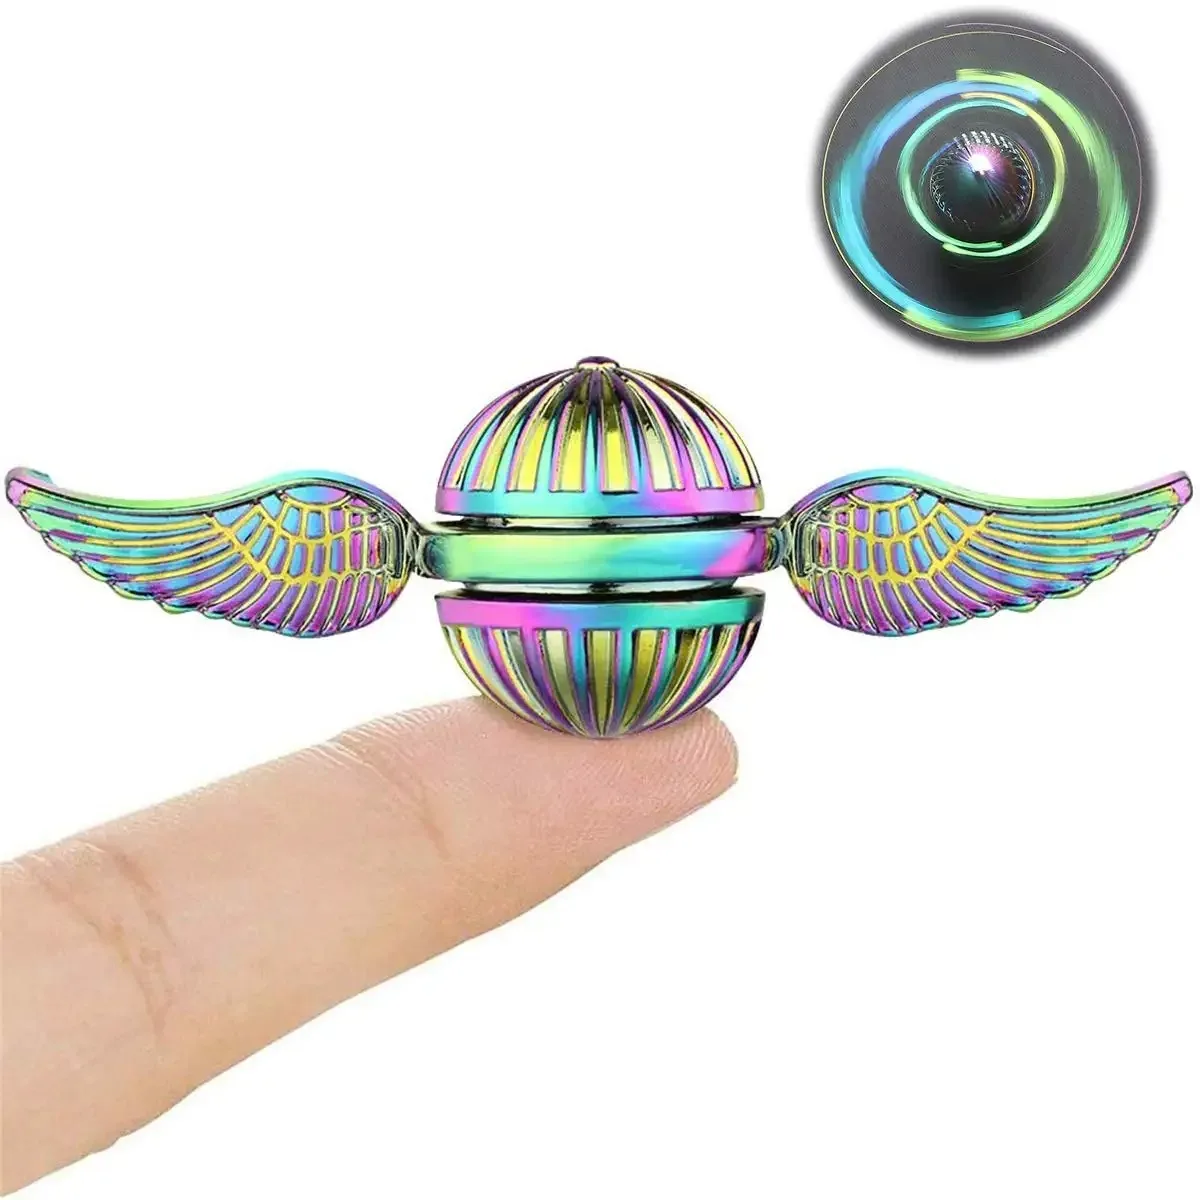 

Fidget Spinner Magic Power ADHD Anxiety Toys Stress Relief Reducer Hand Bearing Spinners Toy Focus Long Spining Gift for Adults